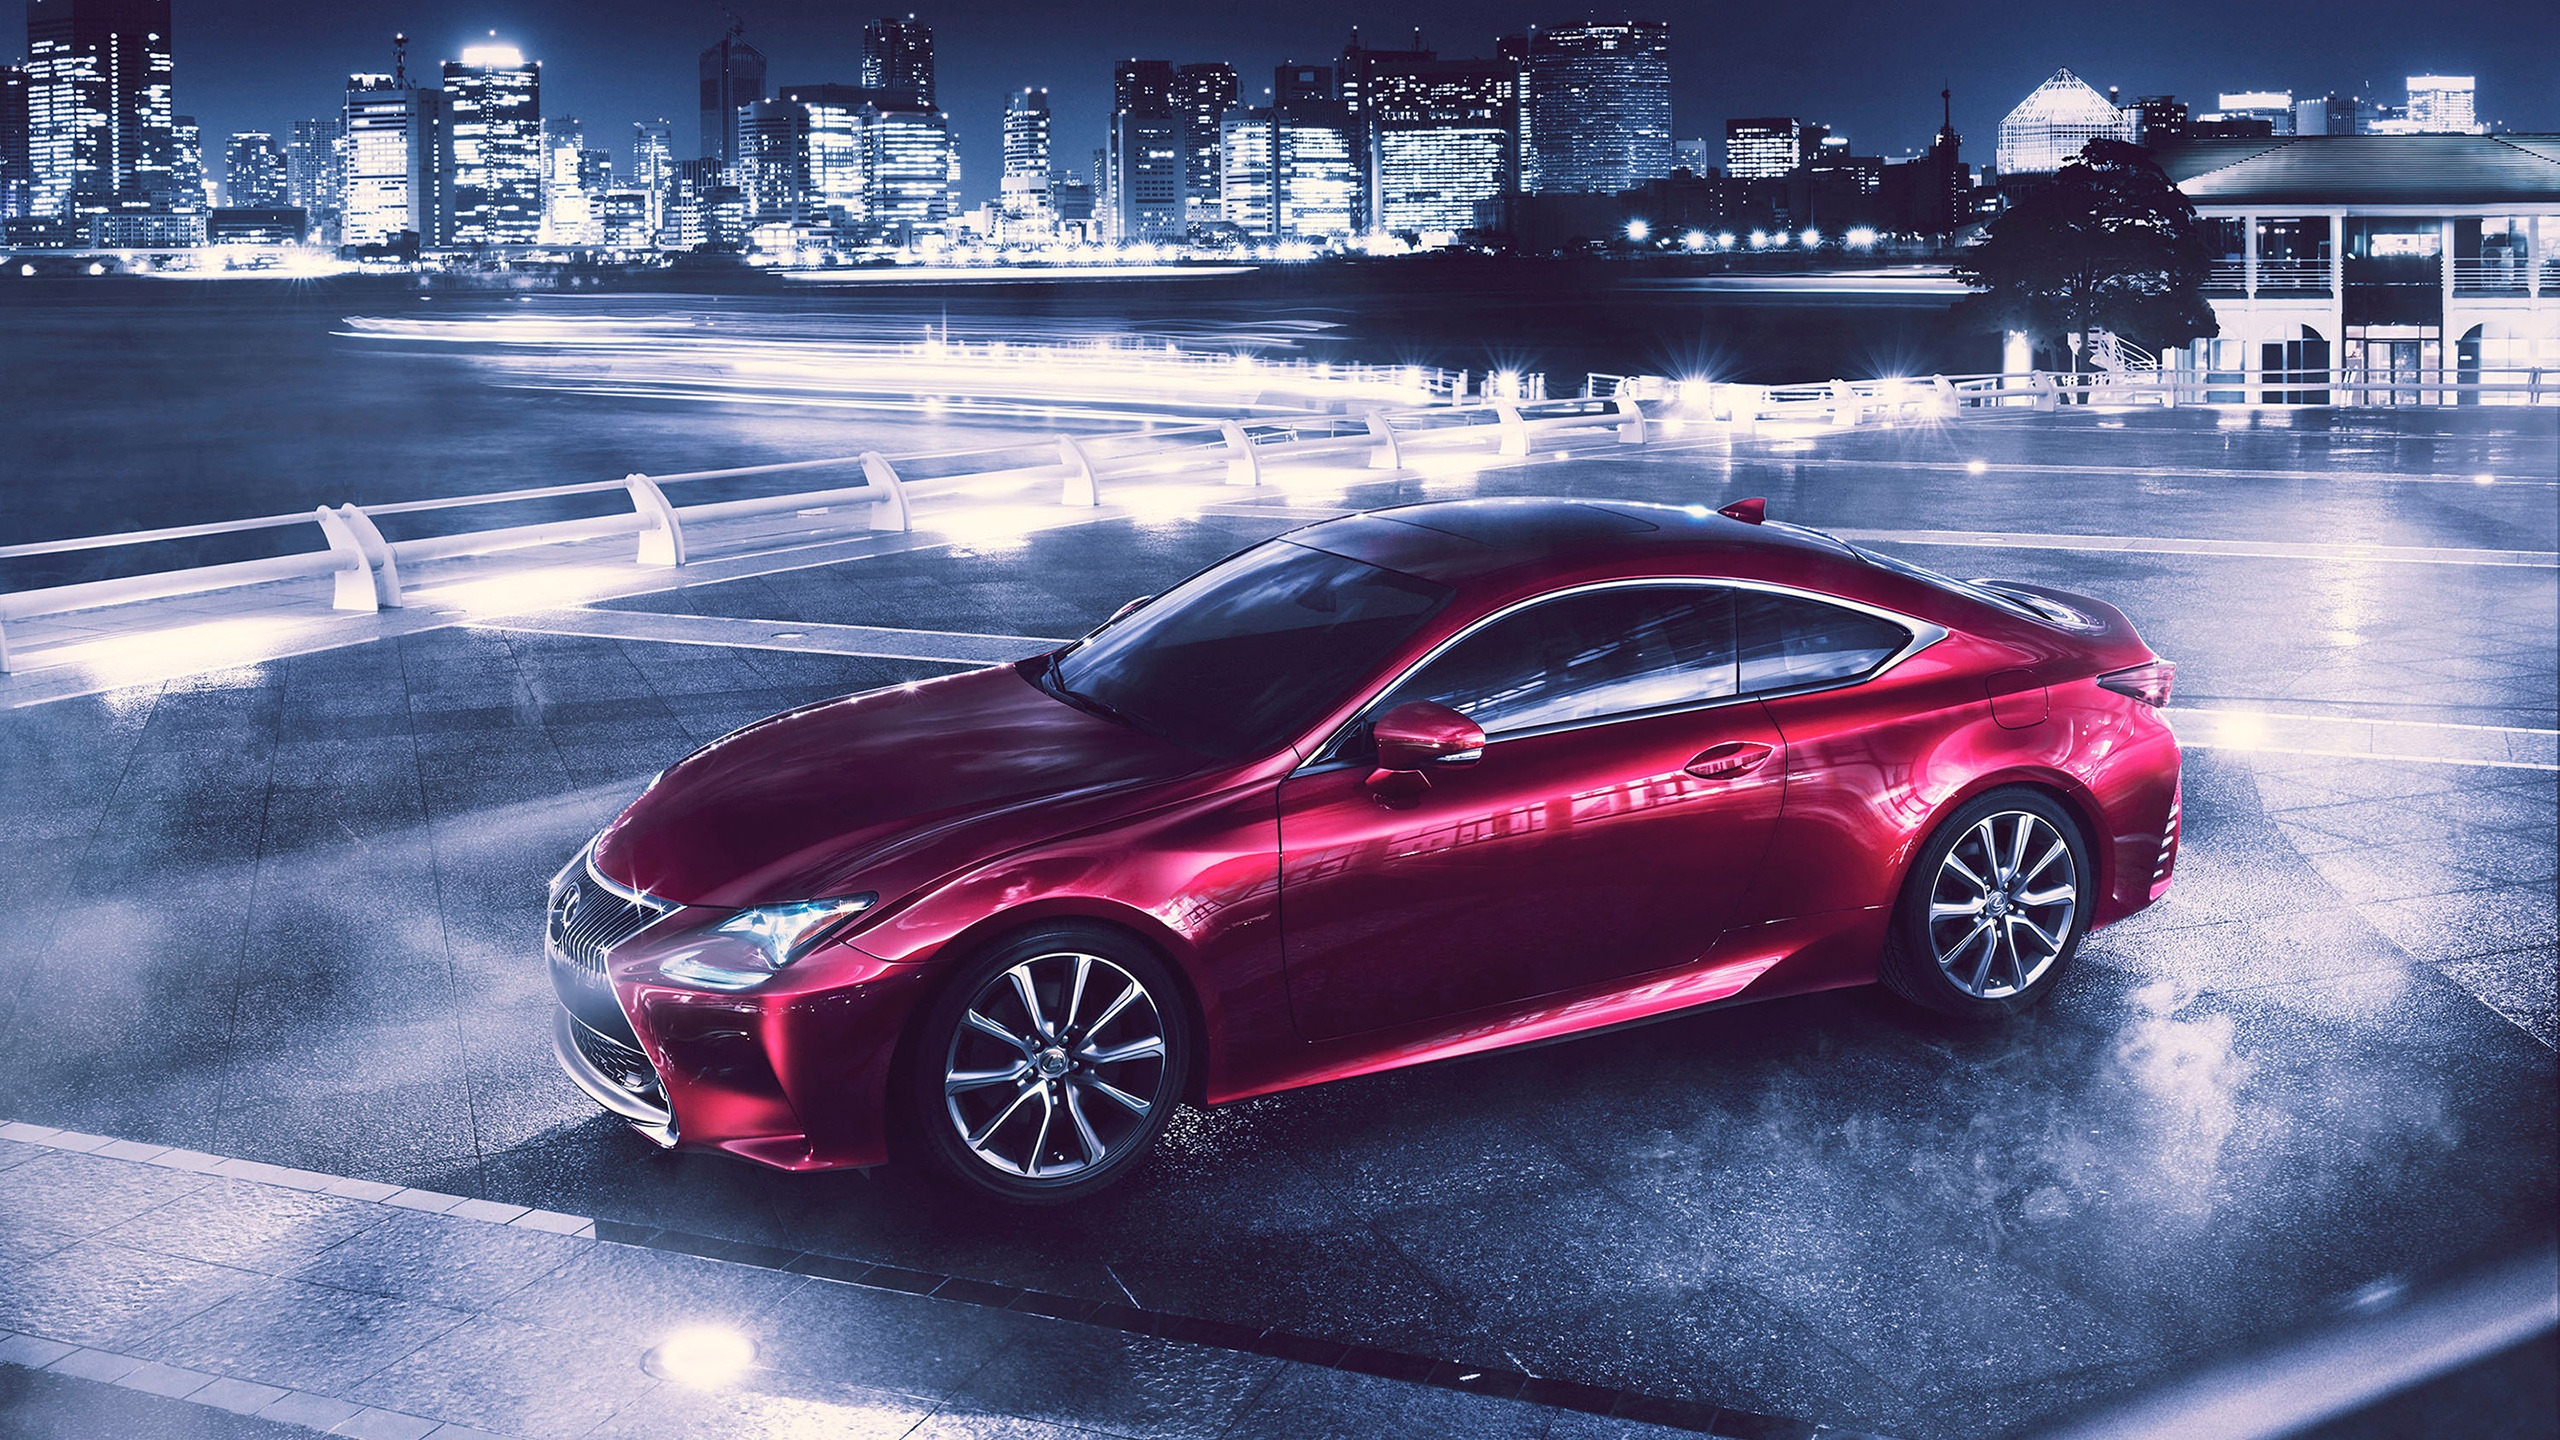 Beautiful 2014 Lexus RC Coupe for 2560x1440 HDTV resolution